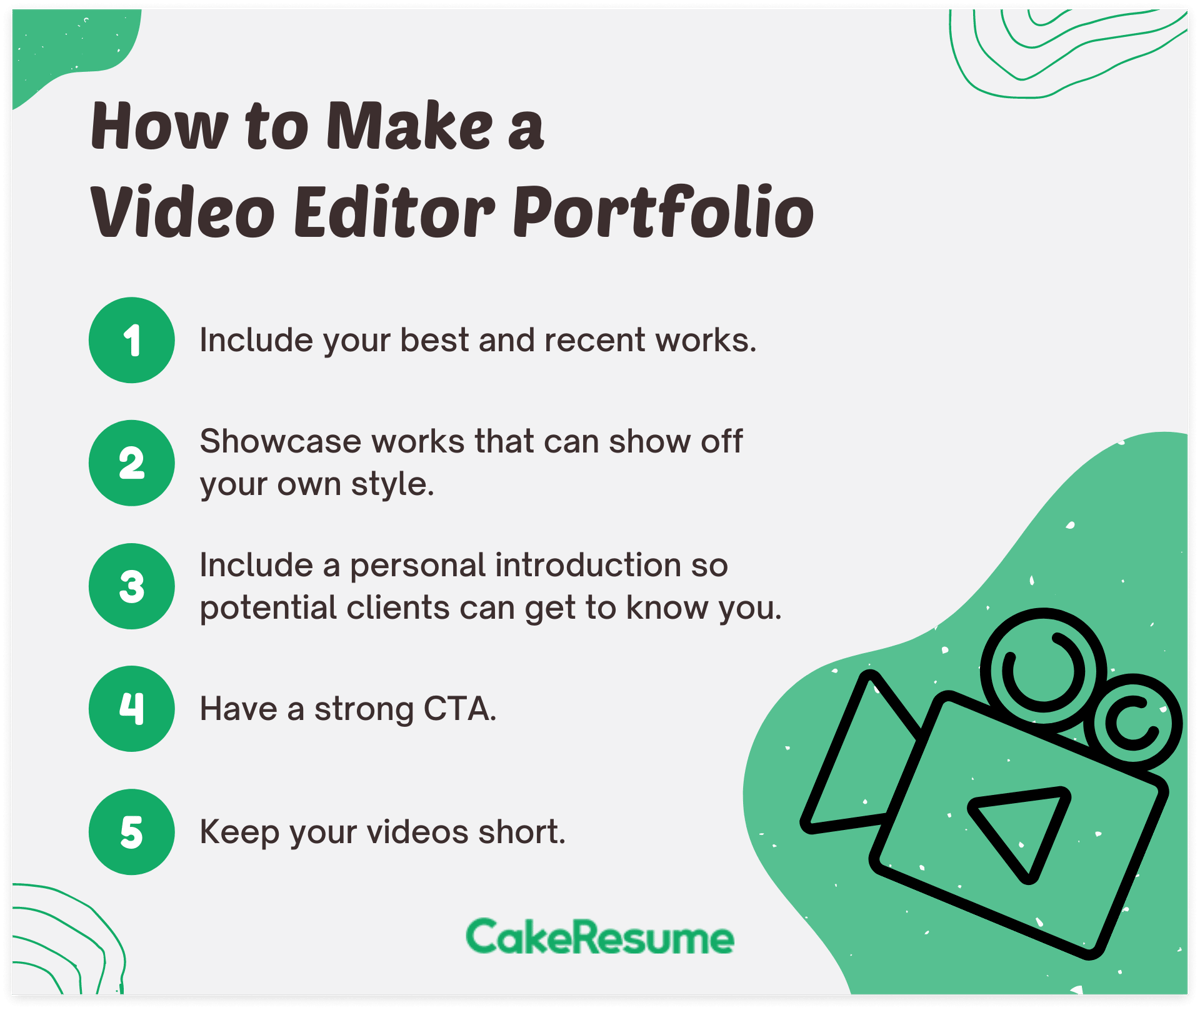 video-editor-portfolio-examples-and-guide-image-1